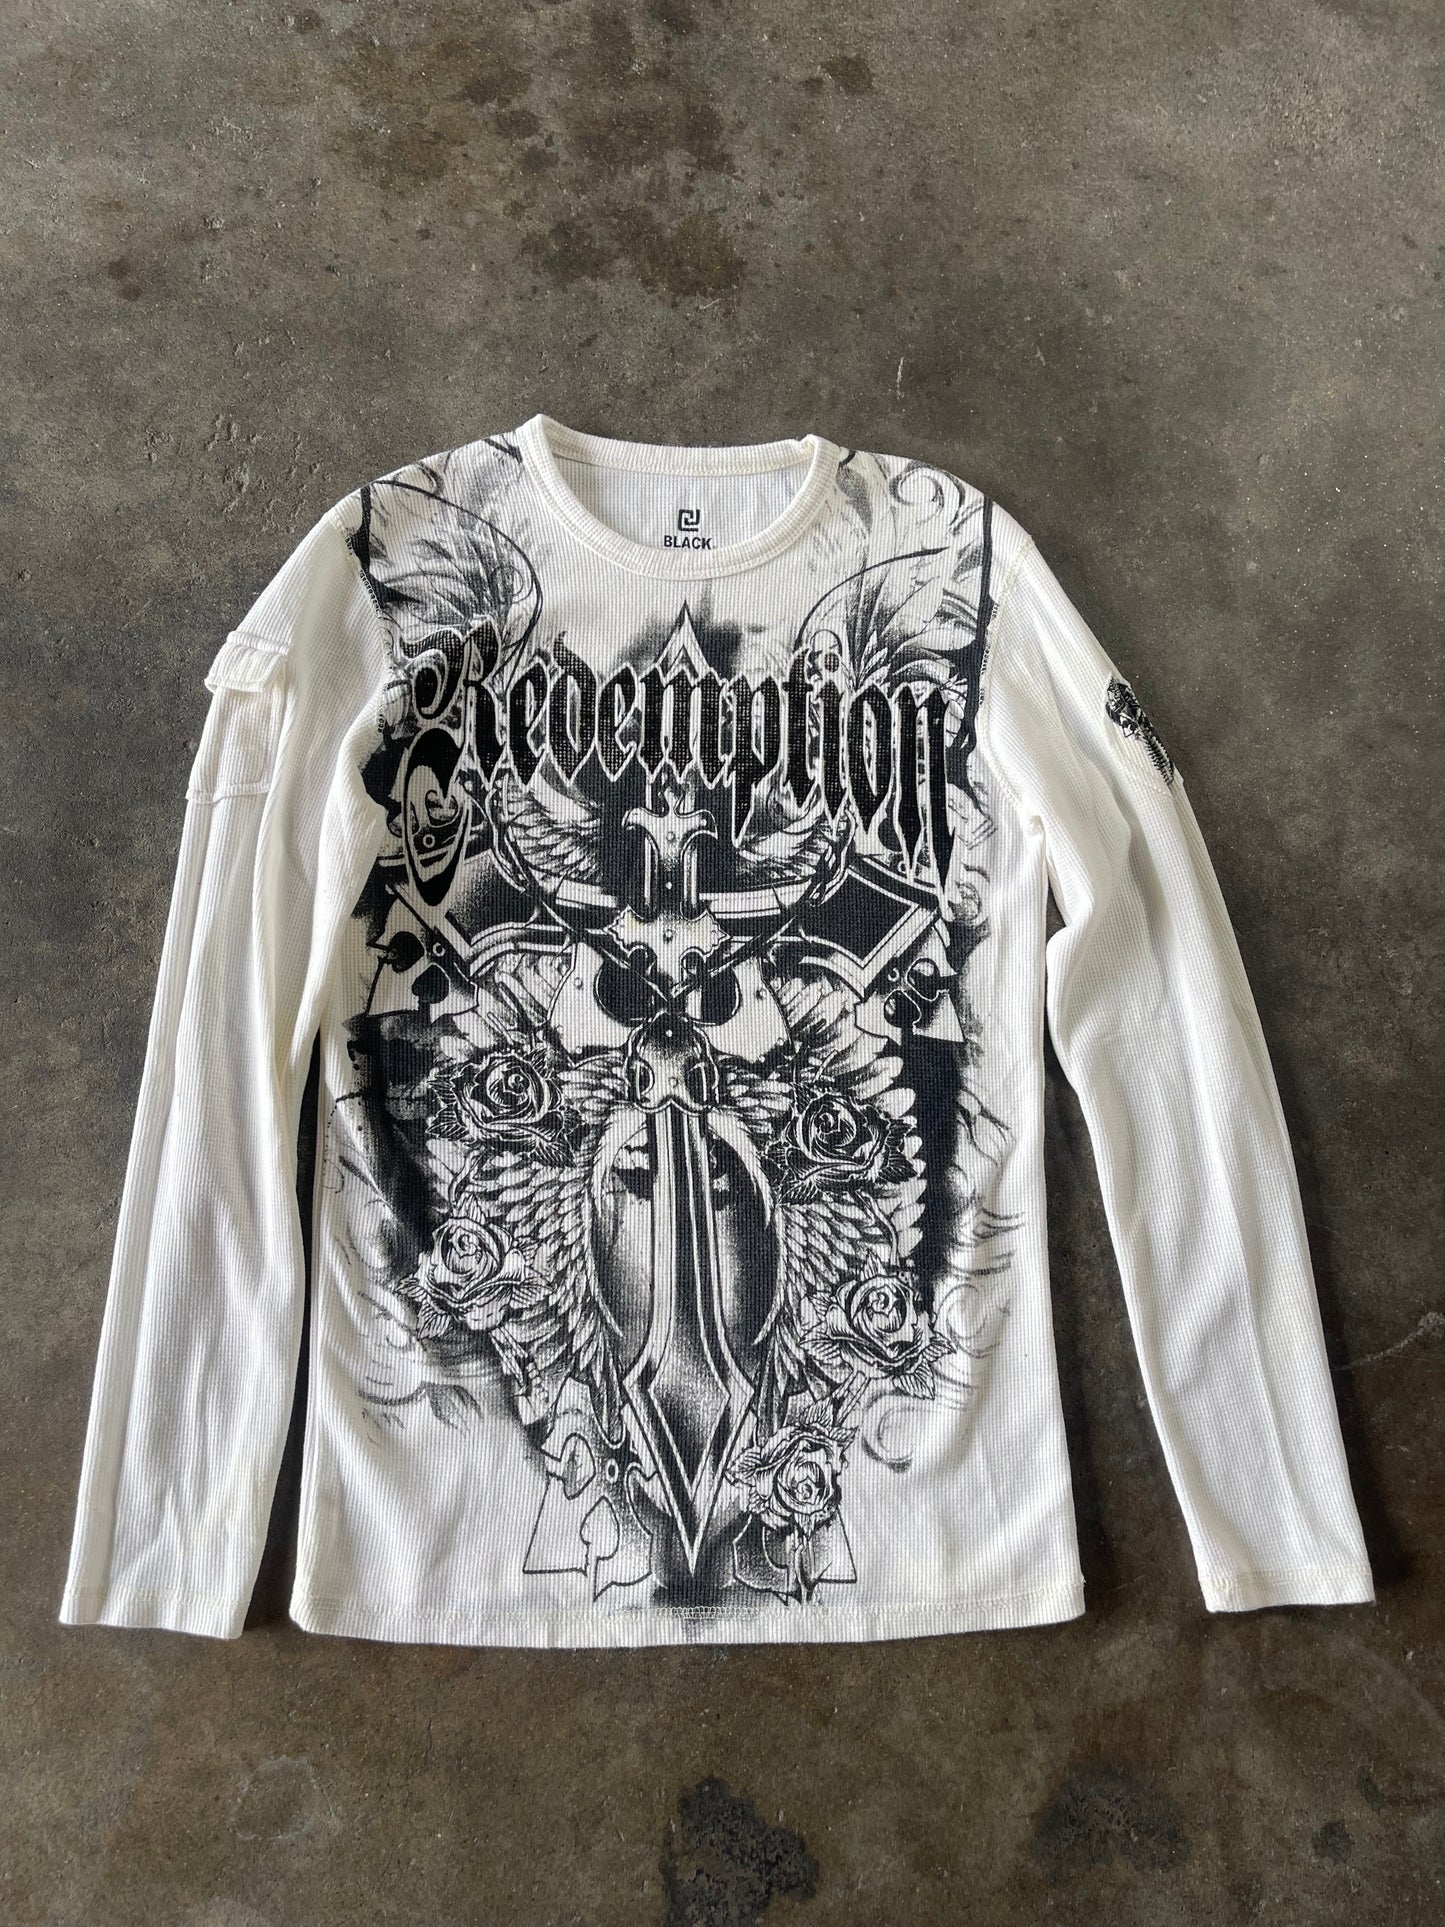 White AOP Redemption Thermal Large